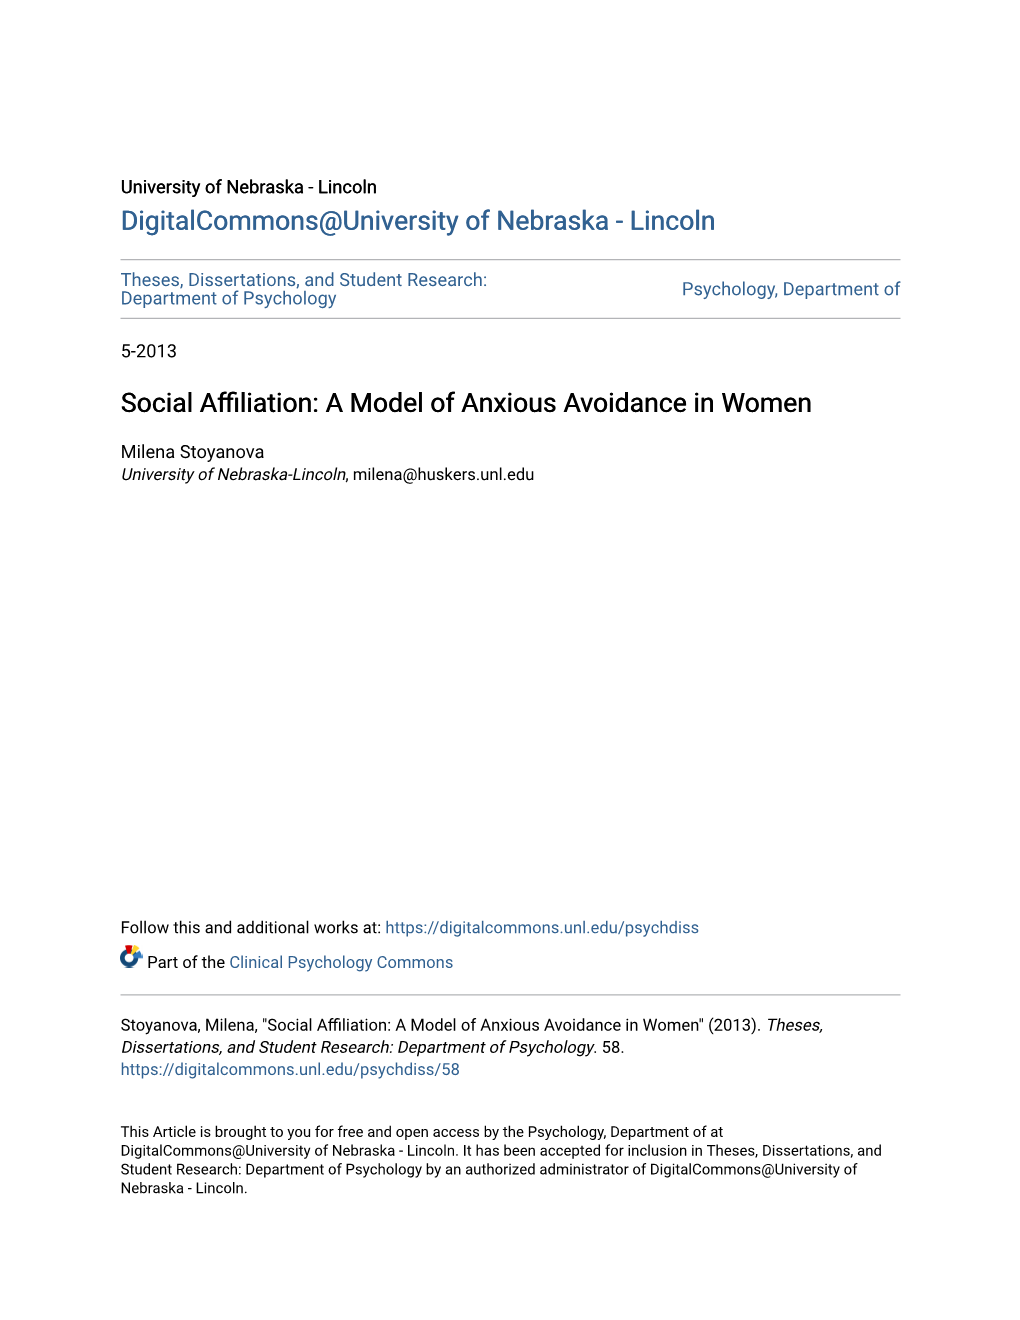 Social Affiliation: a Model of Anxiousv a Oidance in Women